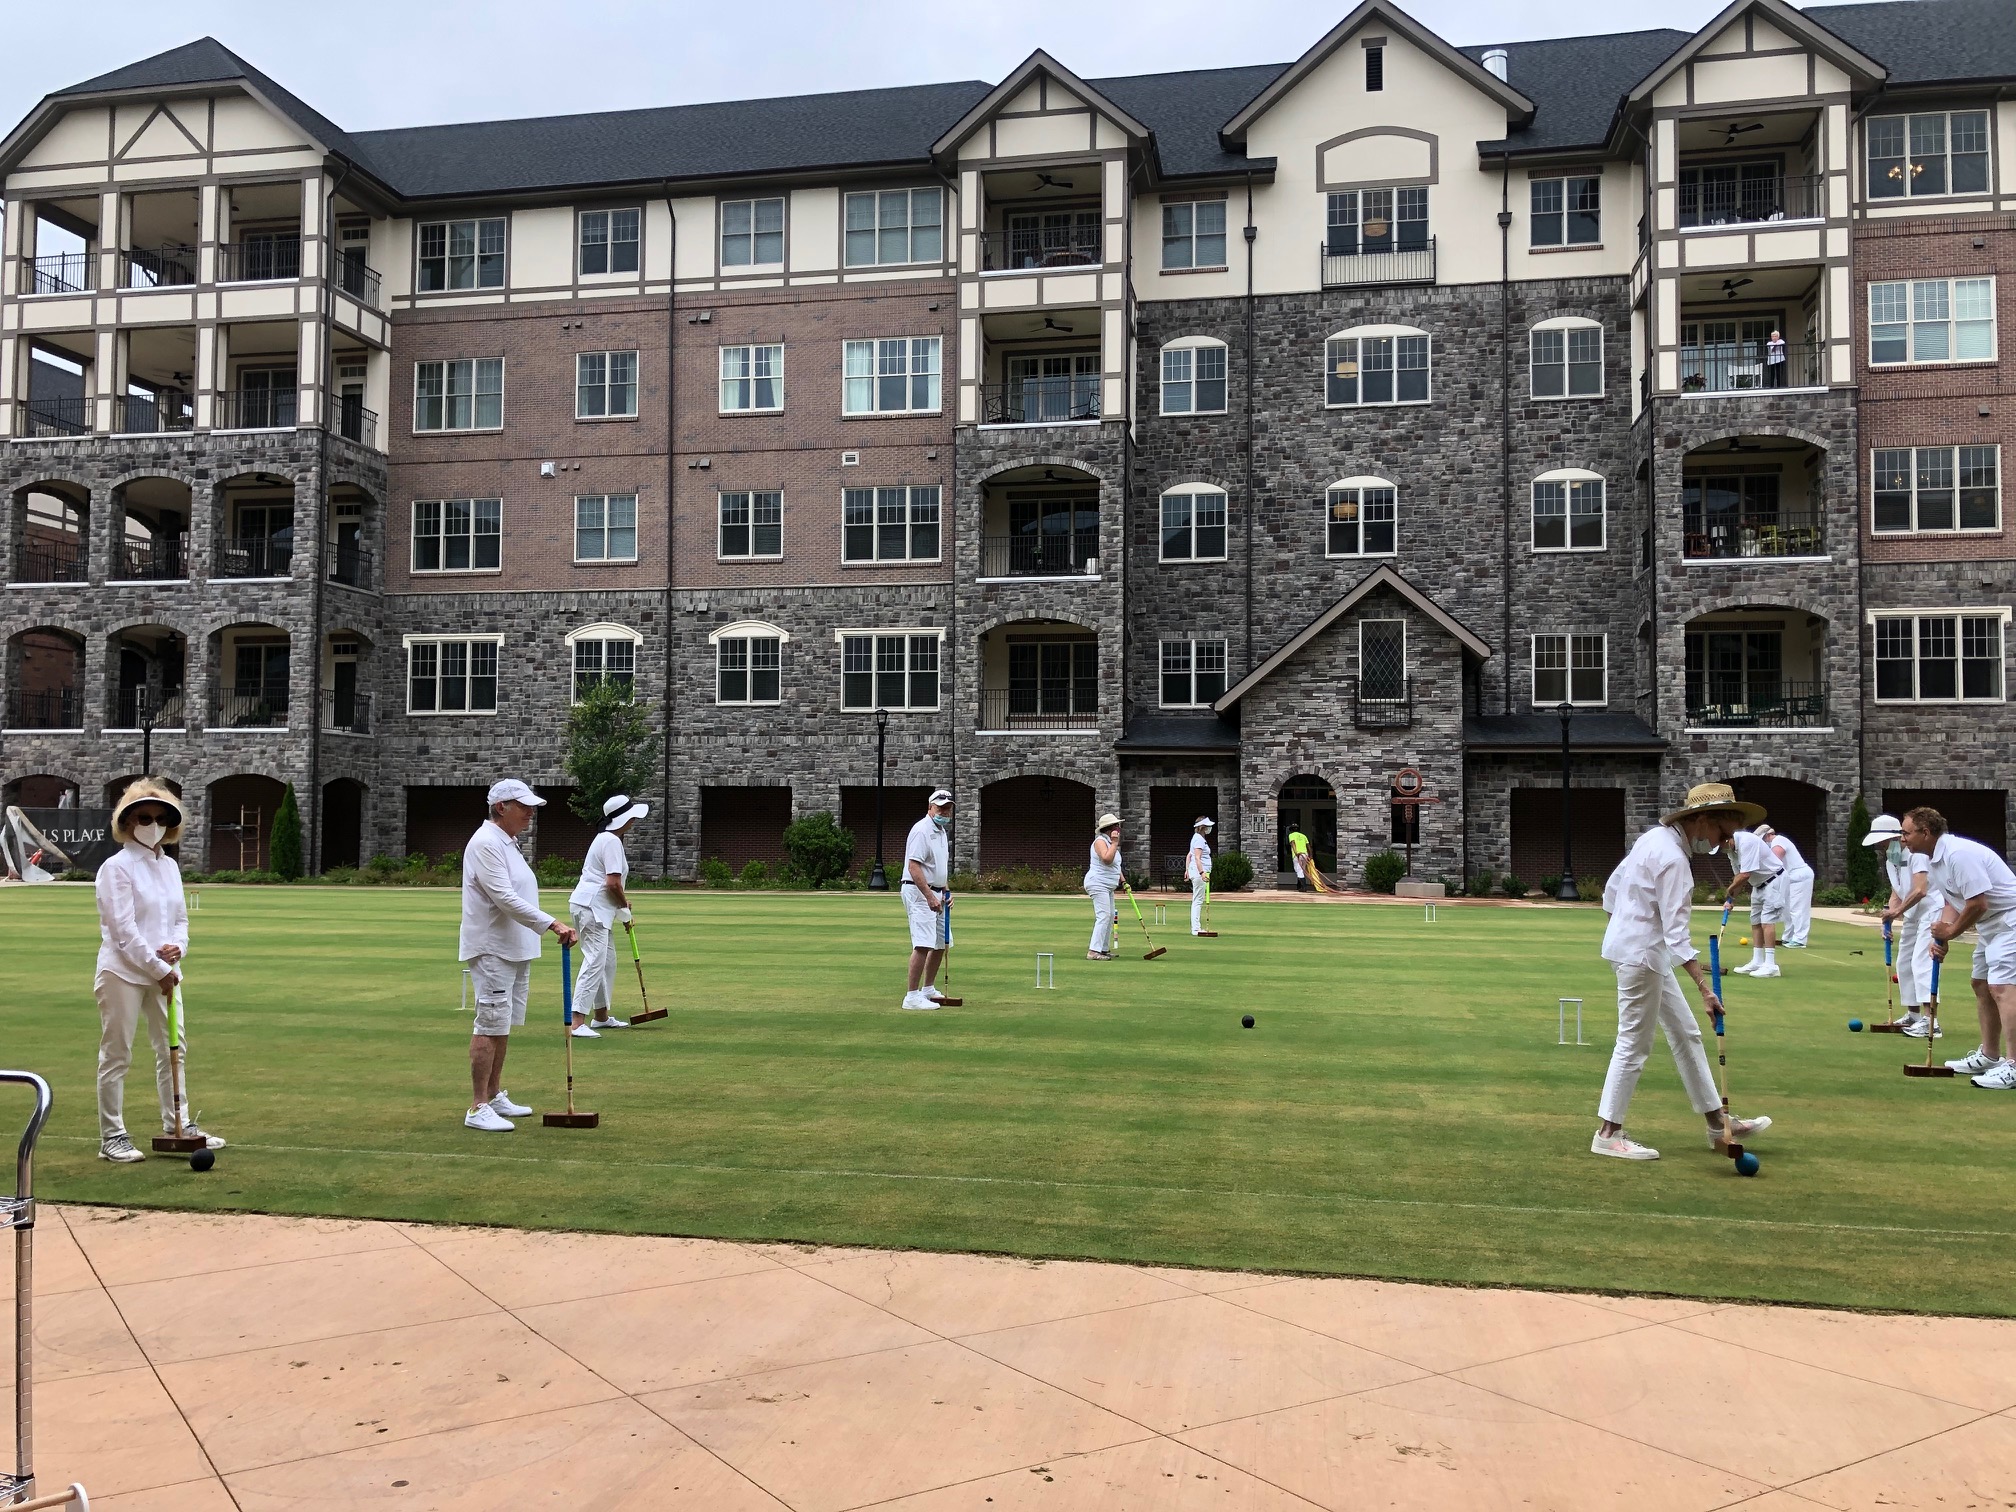 Croquet is a good sport for COVID-19, as social distancing is built into the etiquette of the game